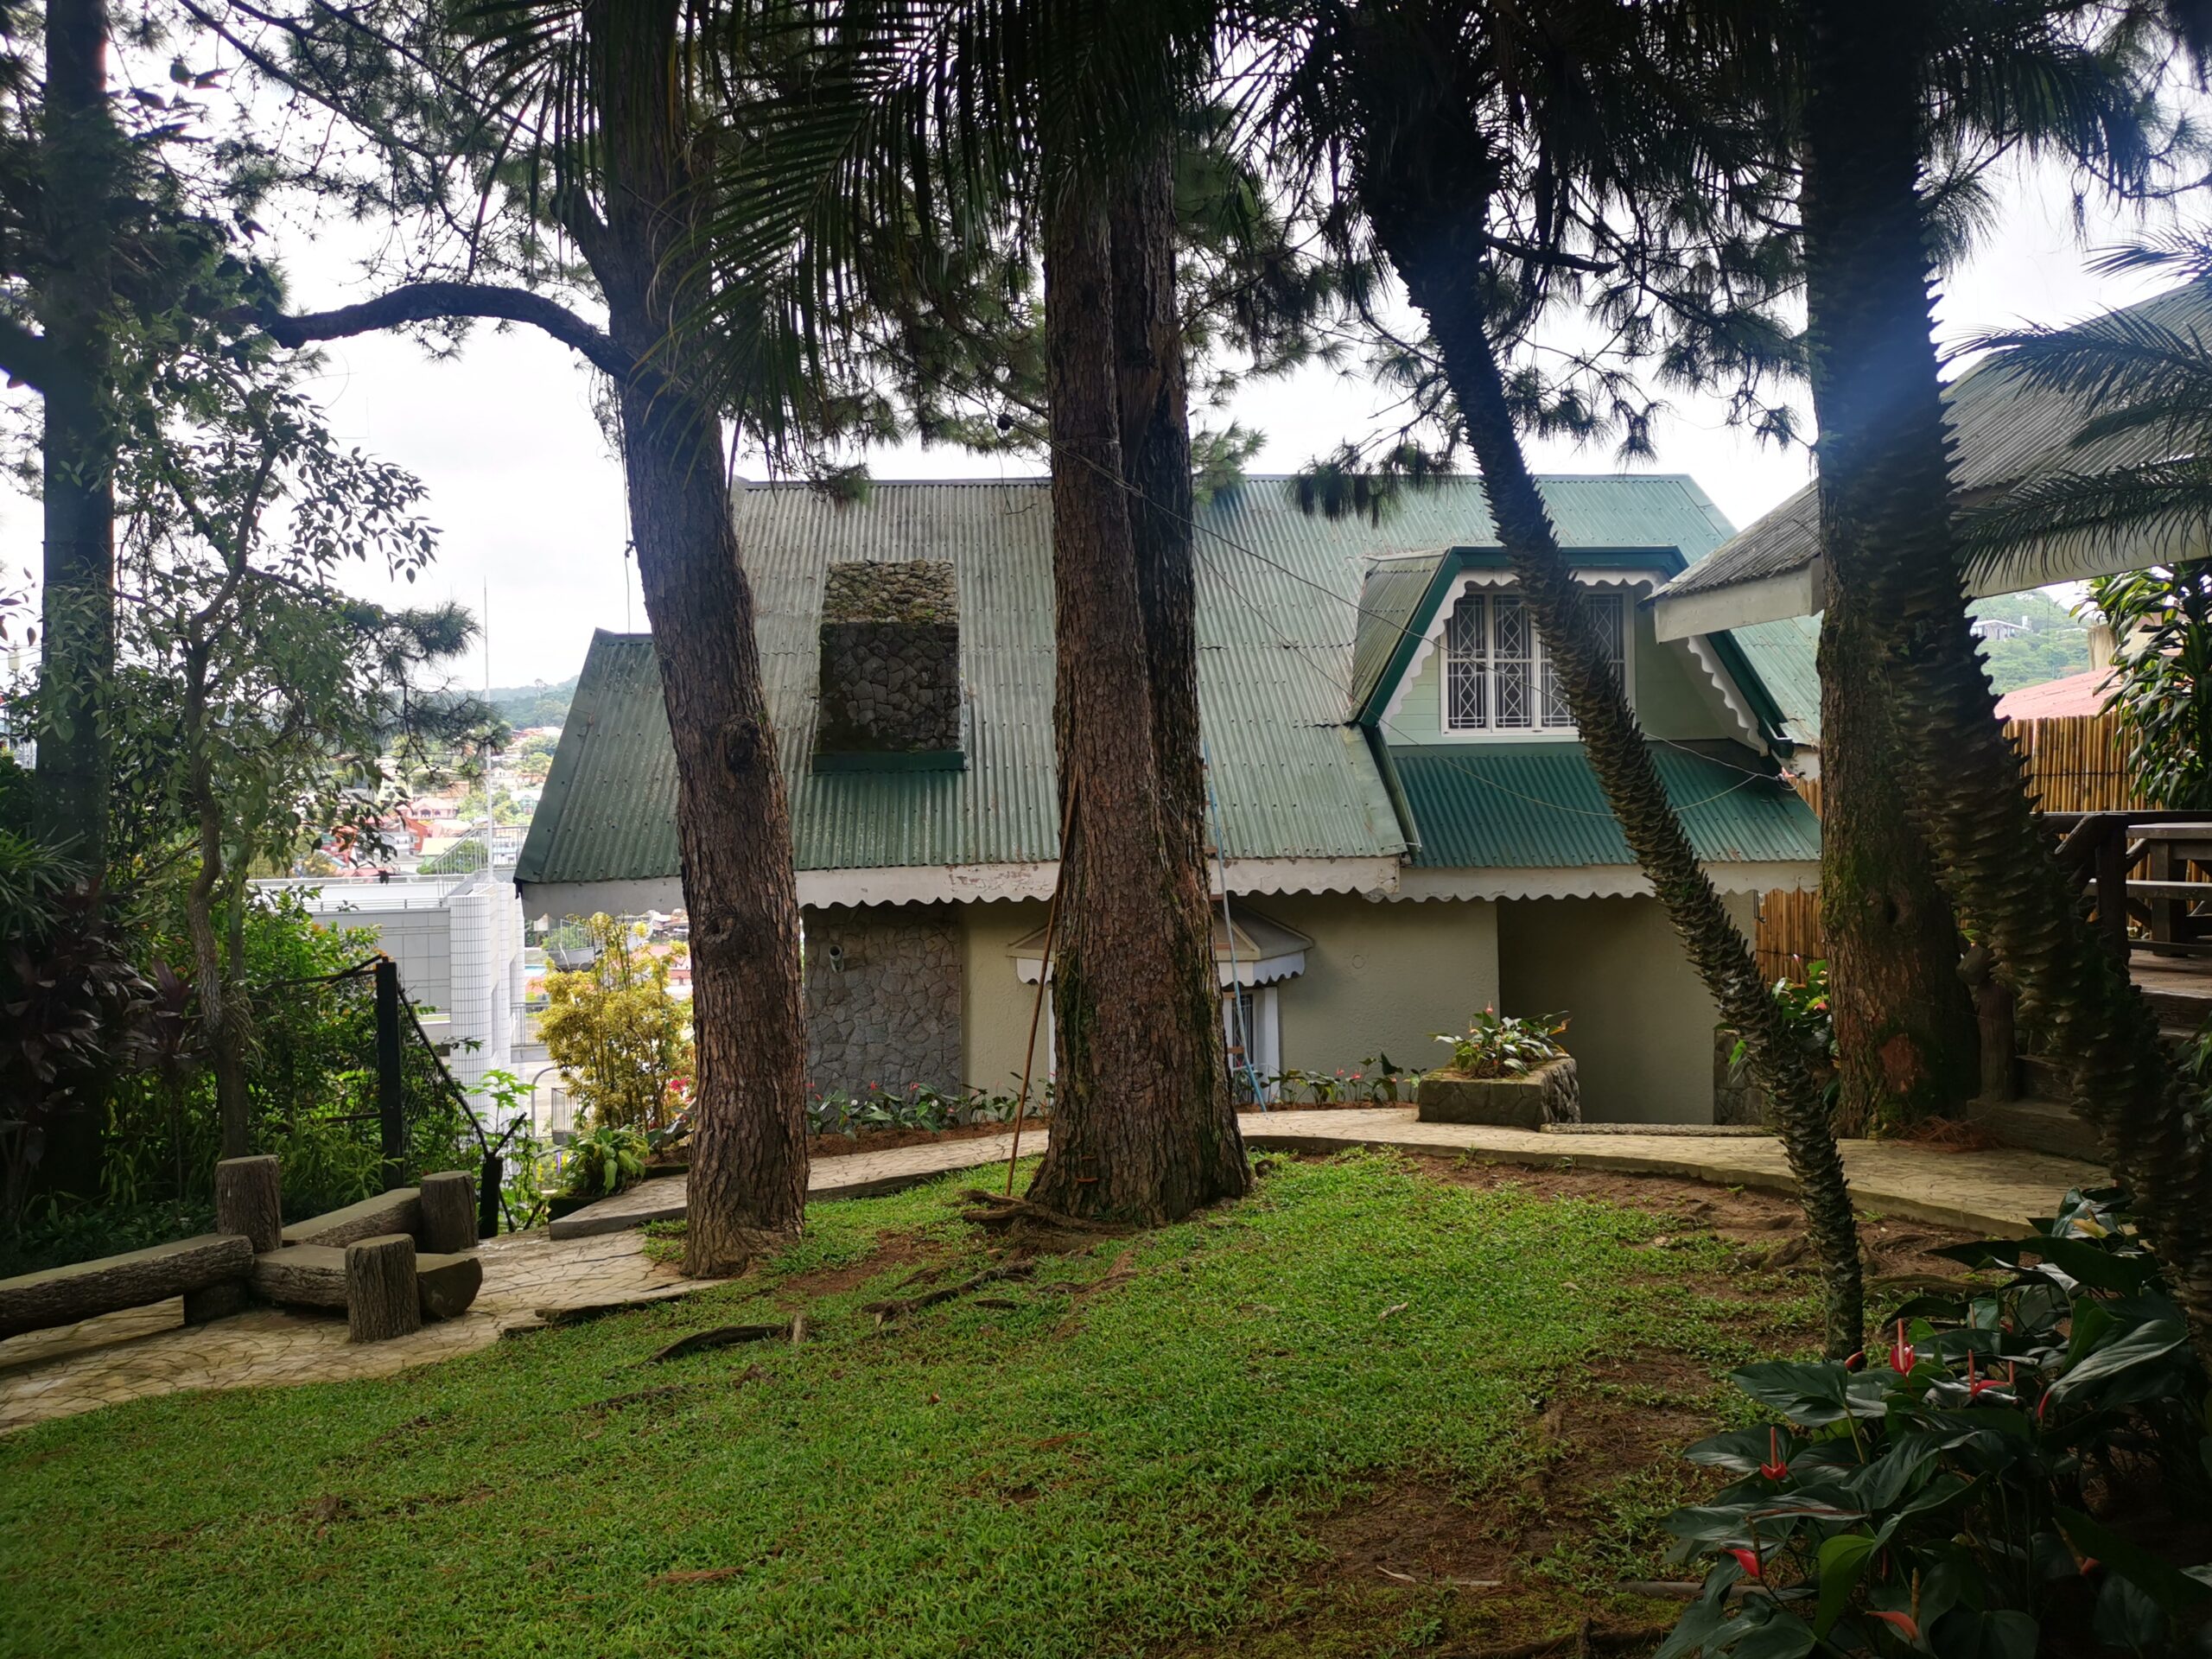 Pinewood finished old Baguio house